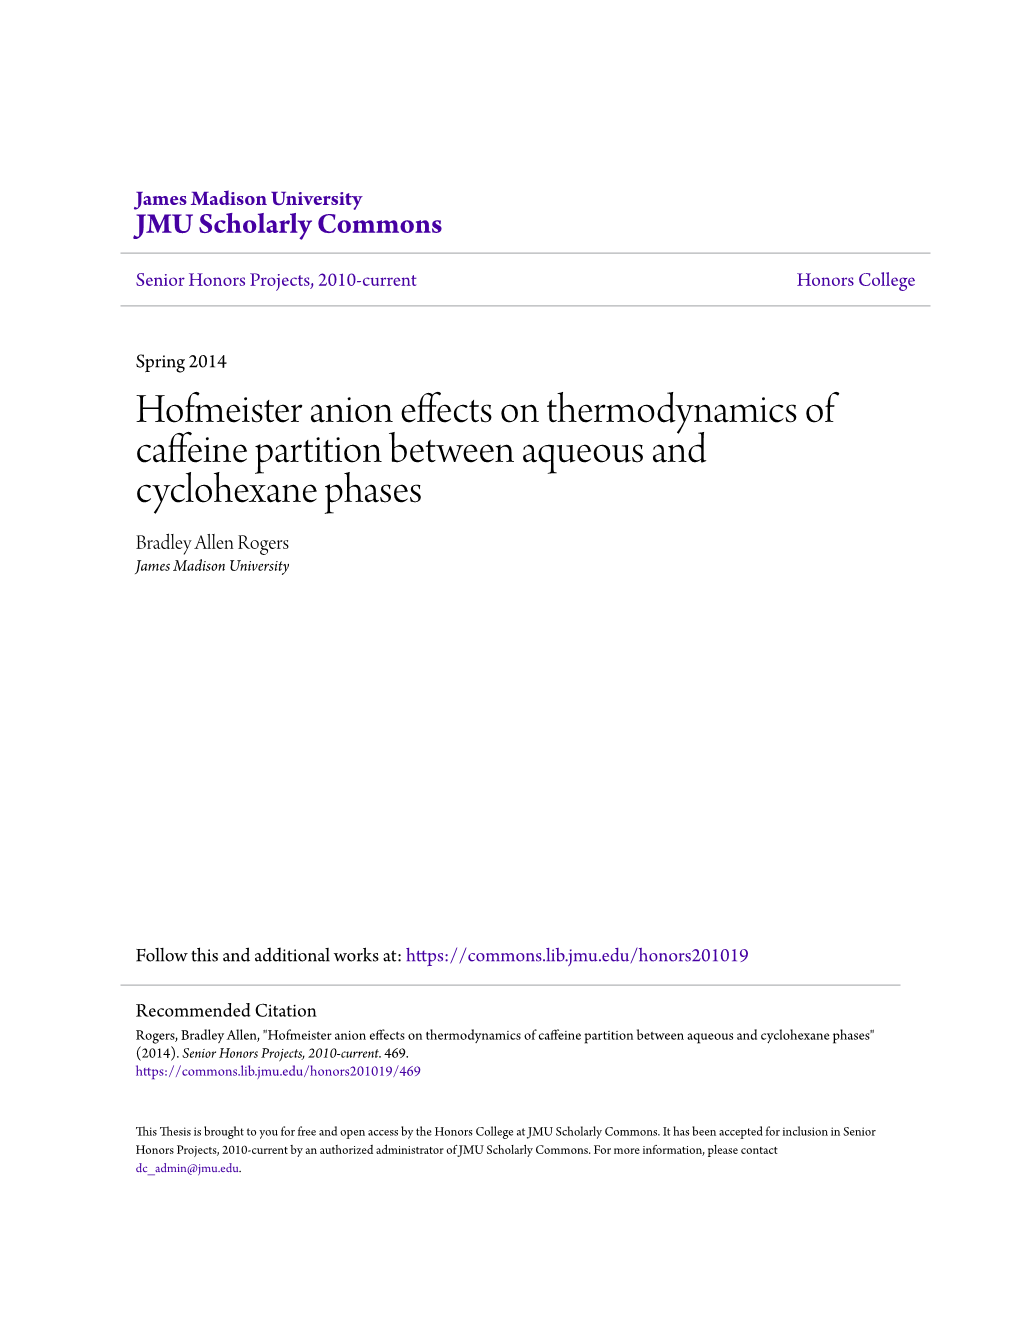 Hofmeister Anion Effects on Thermodynamics of Caffeine Ap Rtition Between Aqueous and Cyclohexane Phases Bradley Allen Rogers James Madison University